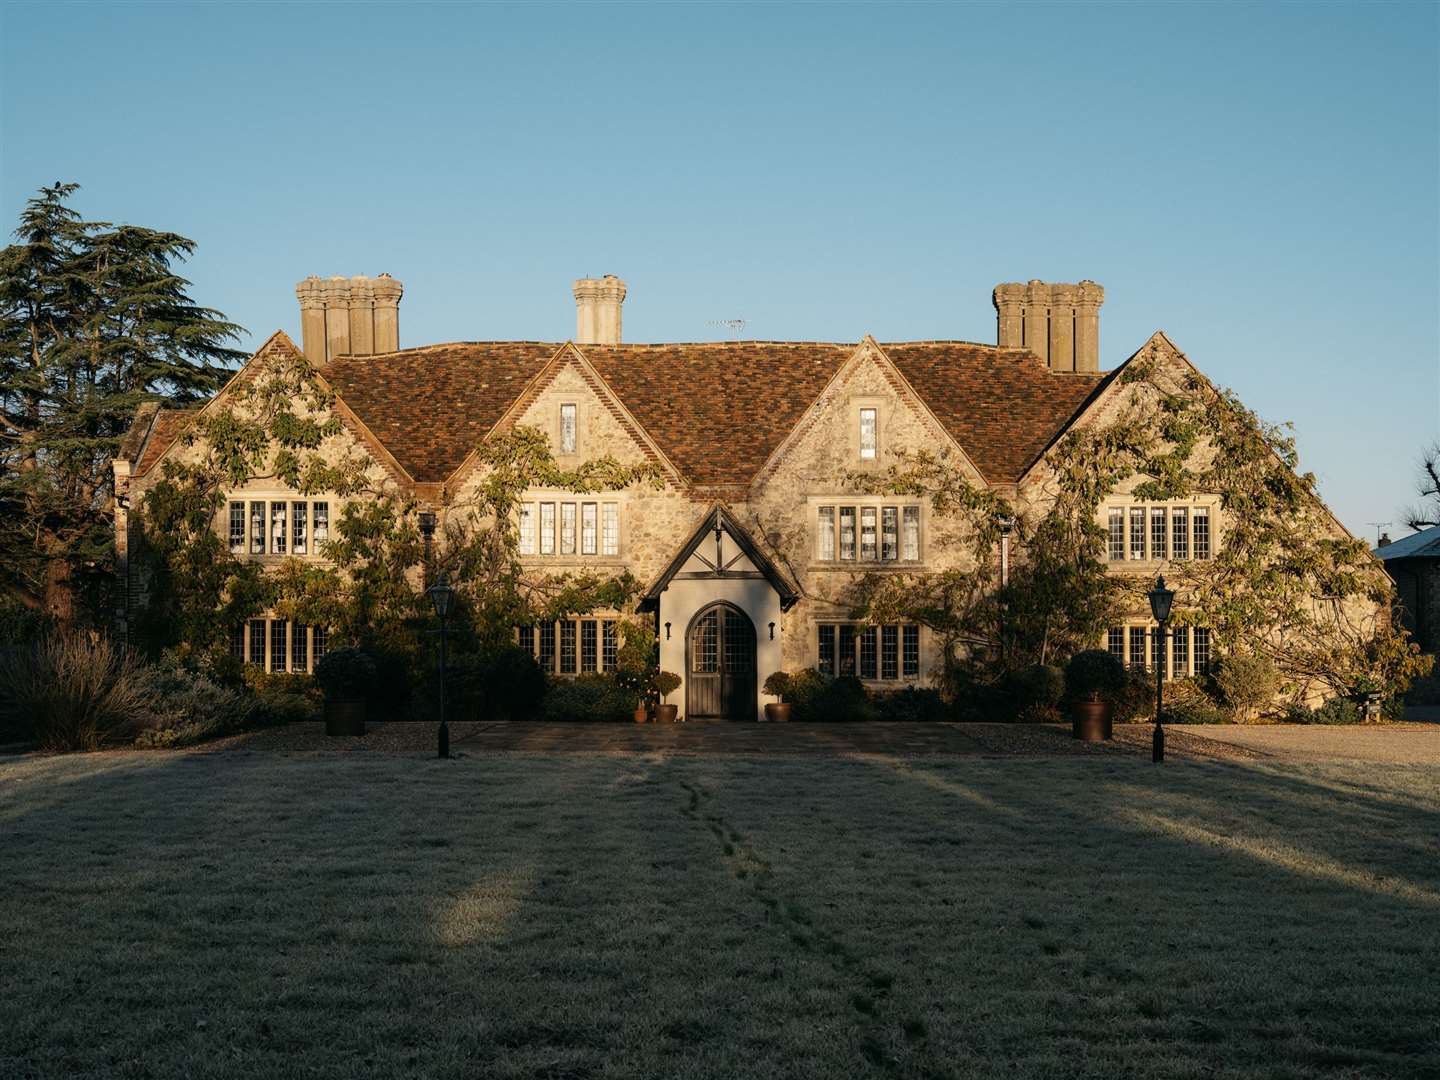 The 17th century manor house. Picture: Mark Anthony Fox